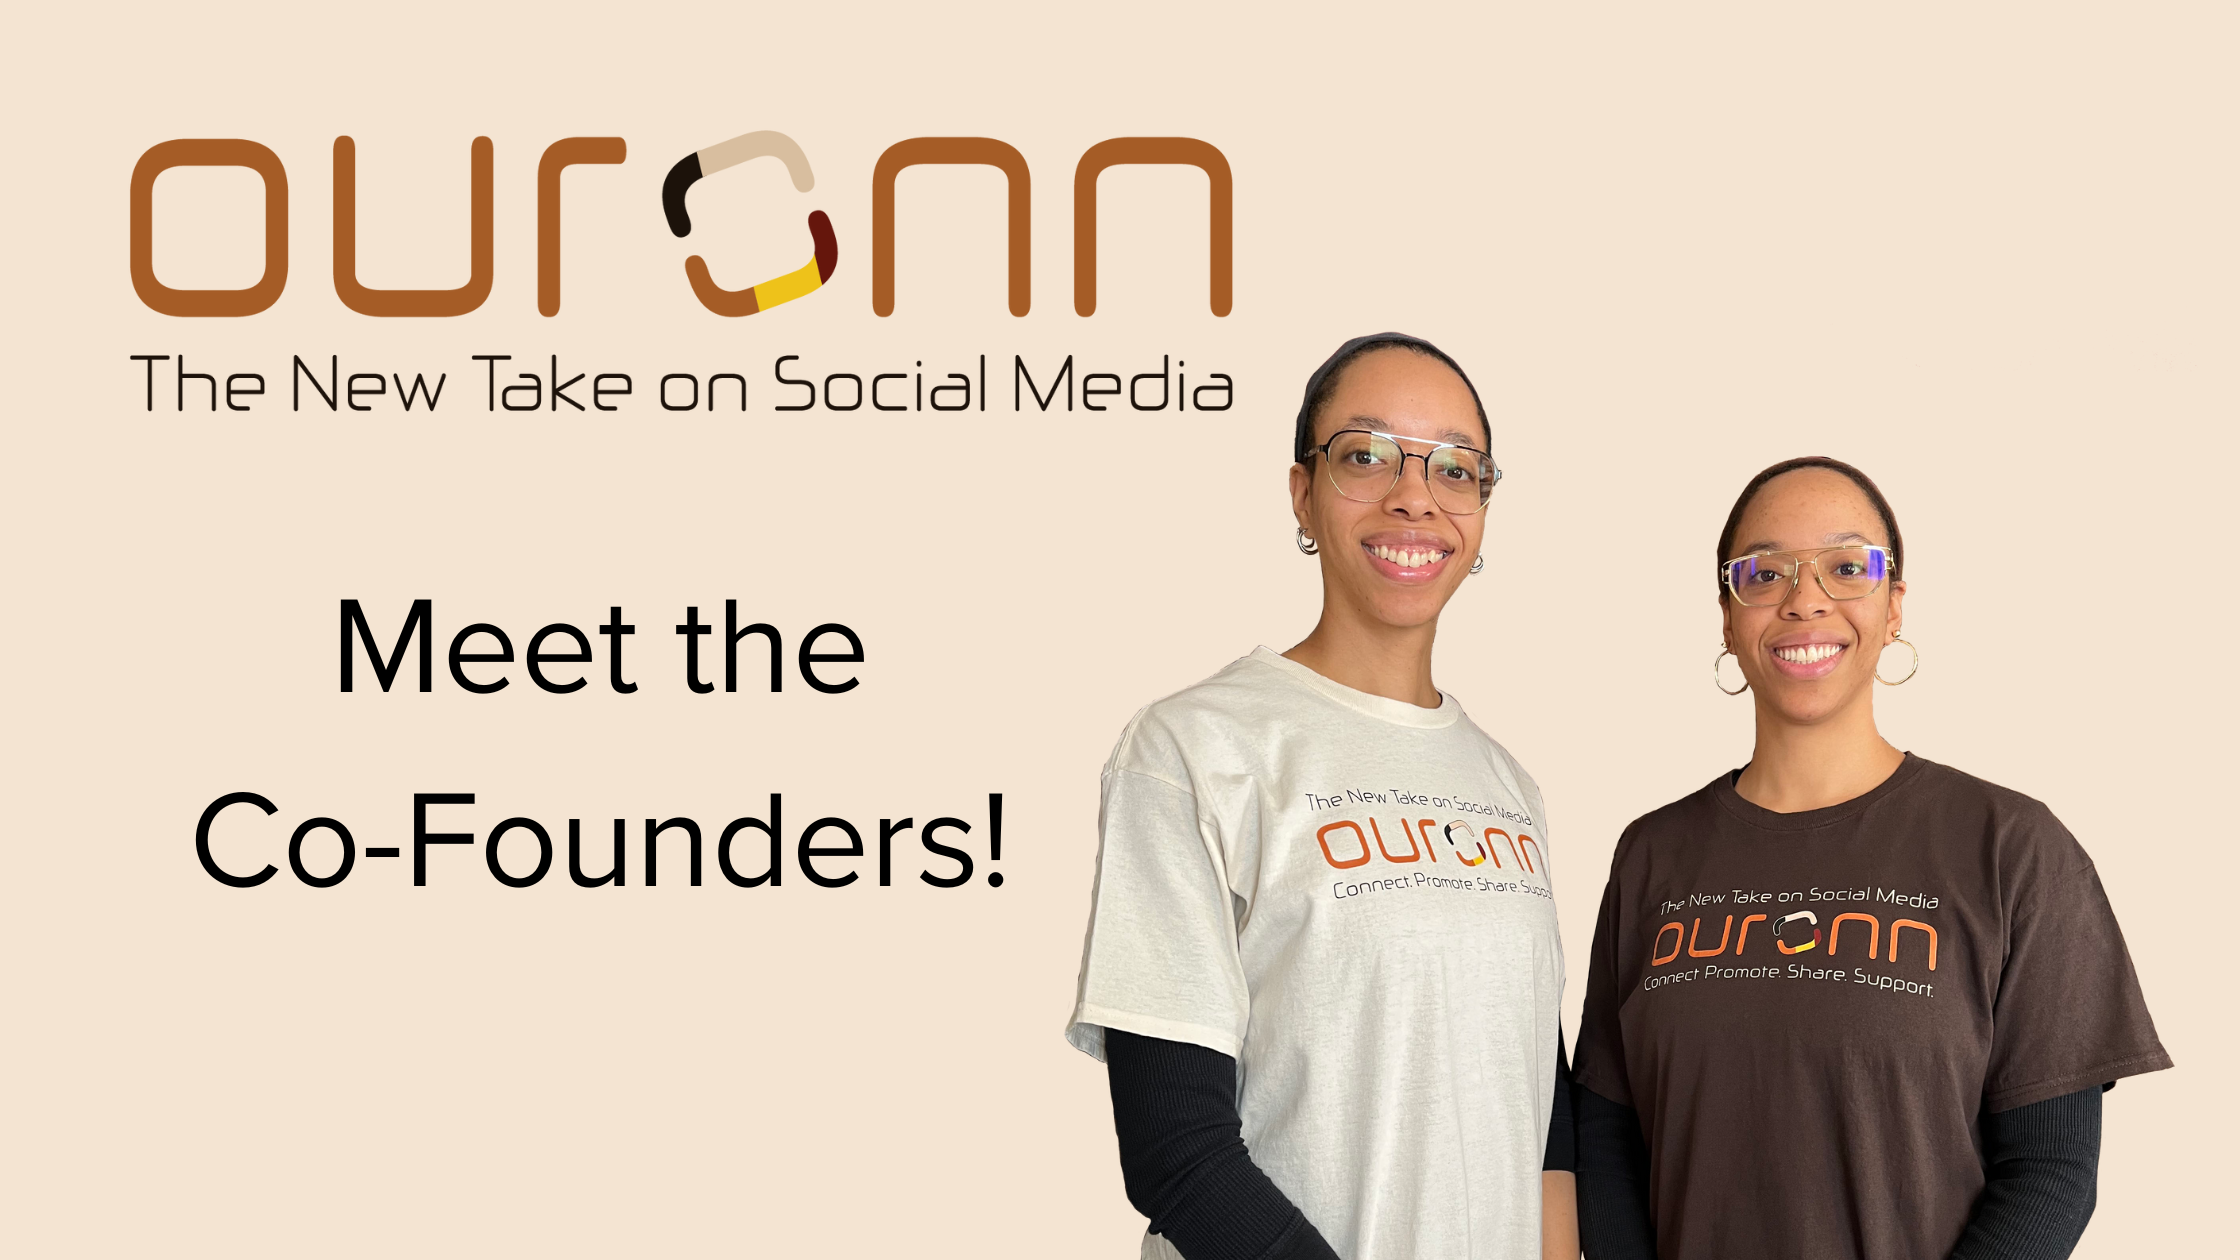 "Meet the Co-Founders of OURONN!" Cover Image